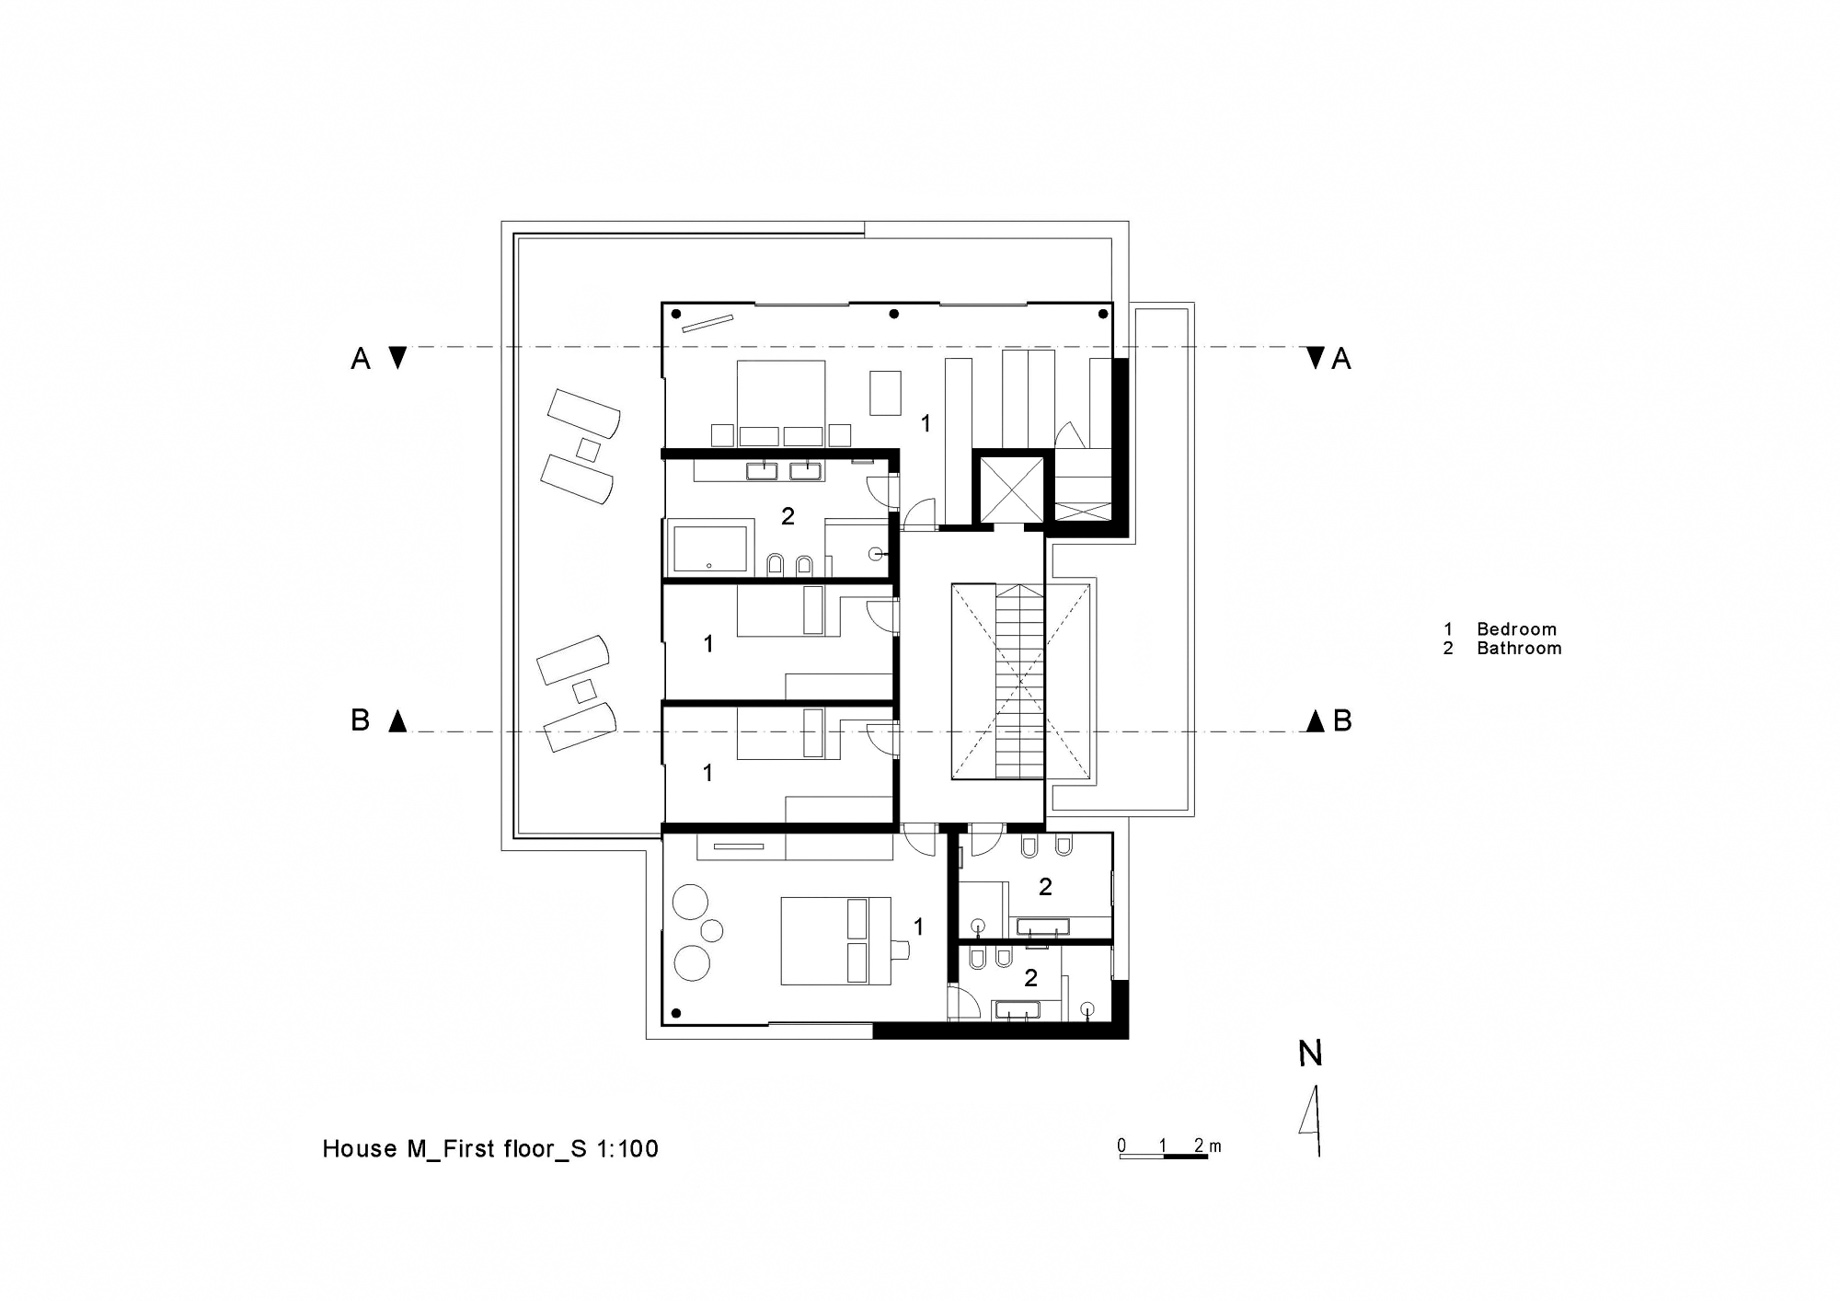 First Floor Plan - House M Luxury Residence - Merano, South Tyrol, Italy